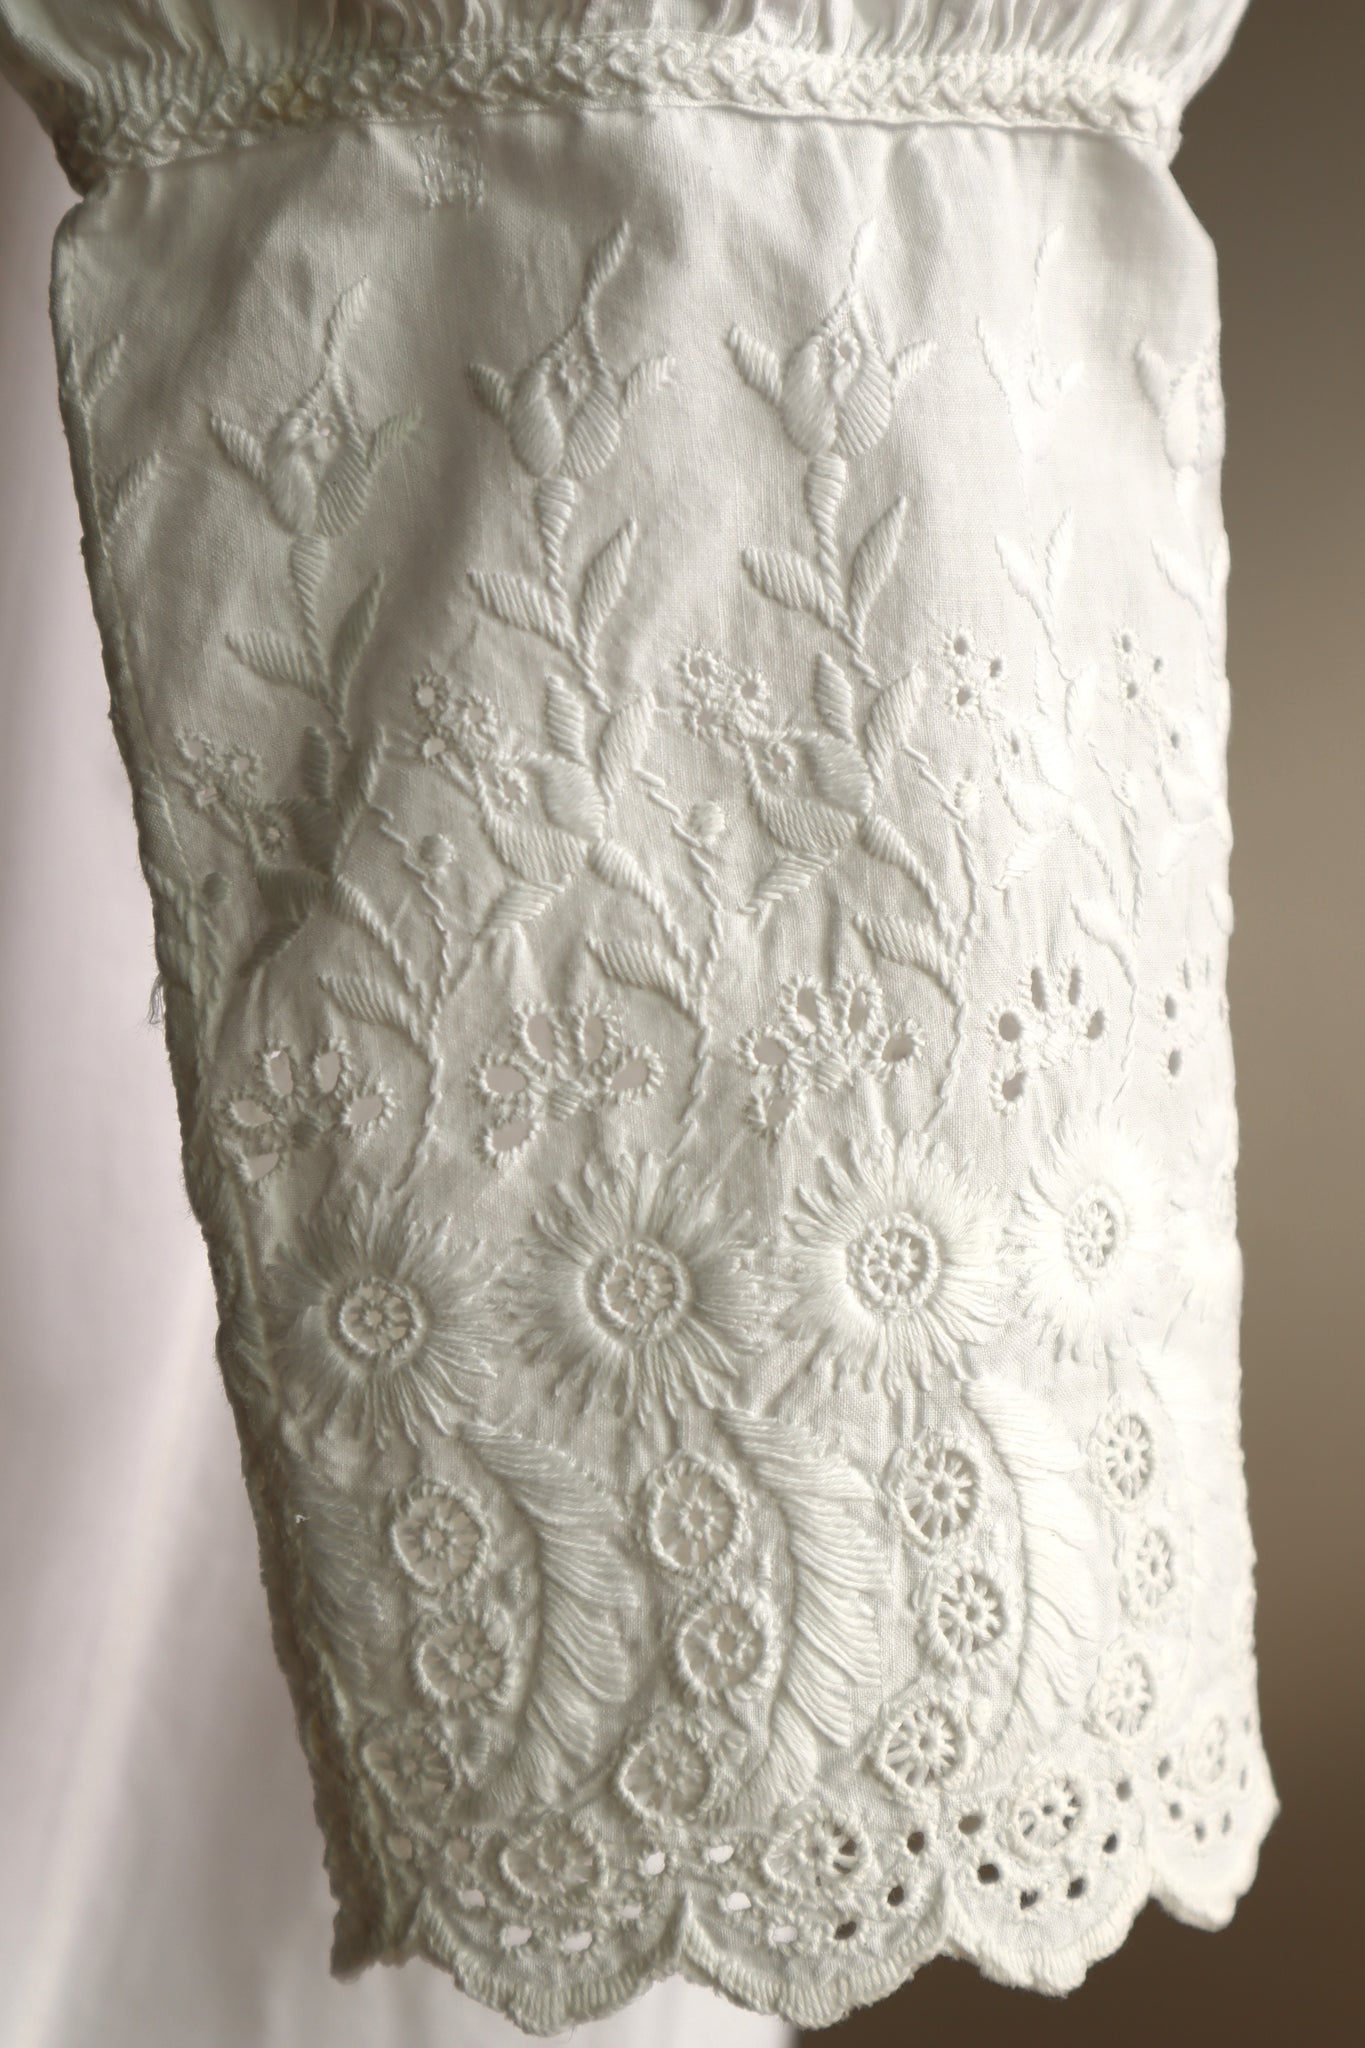 1900s Puffy Sleeves Cotton Dress